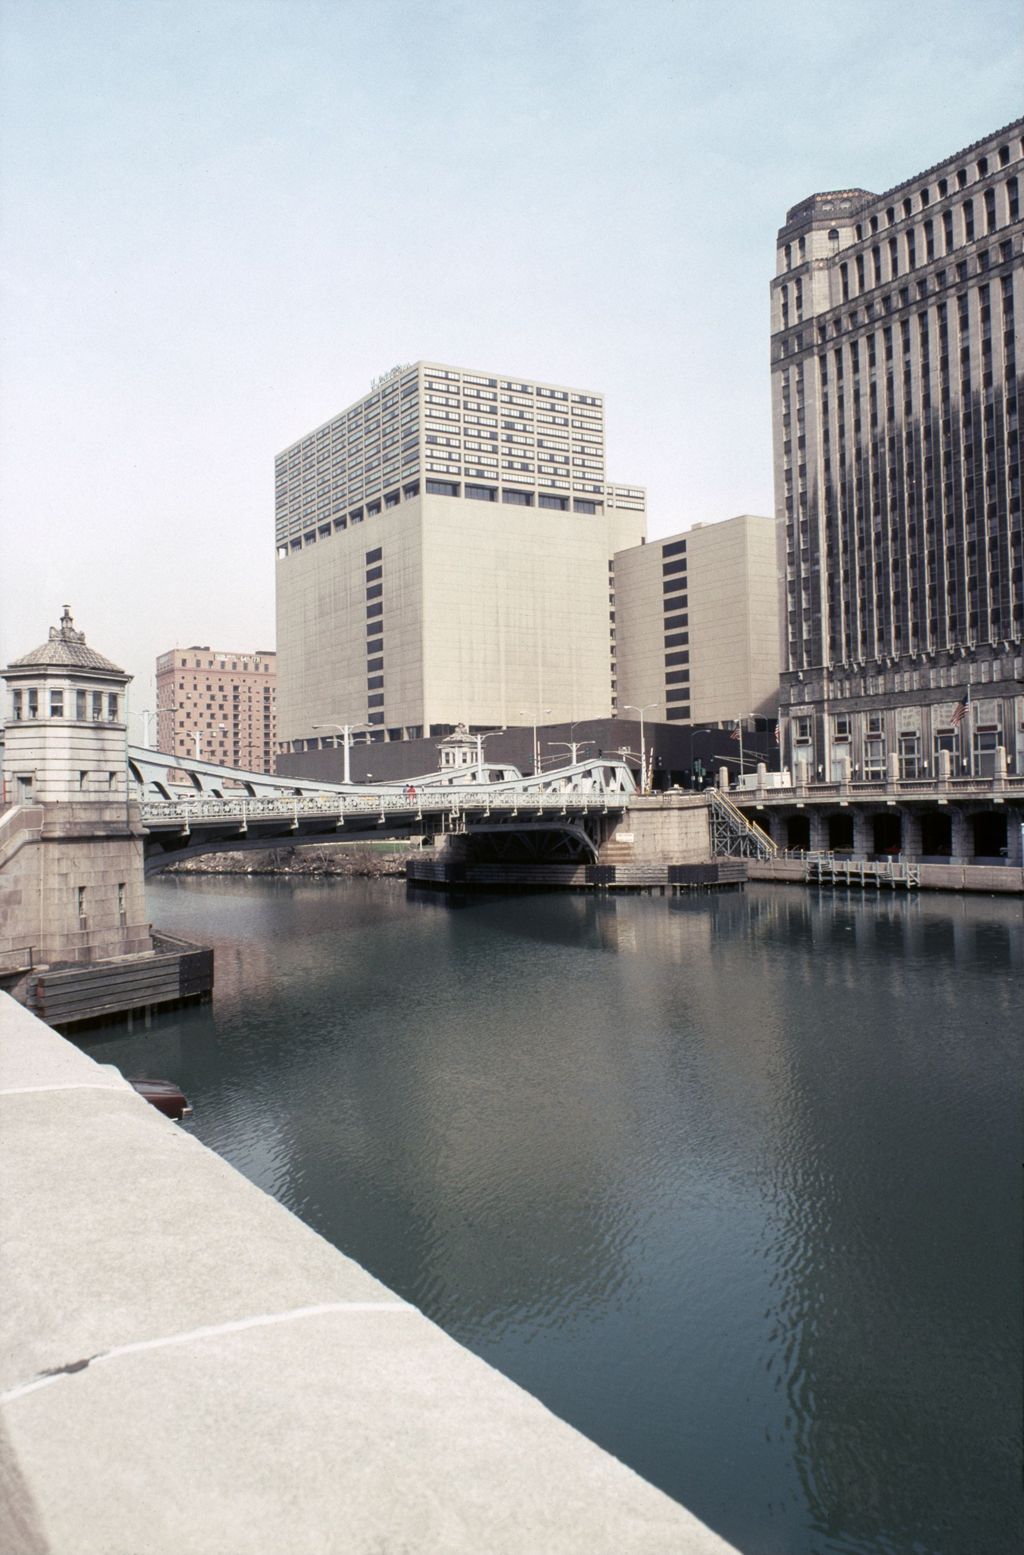 Miniature of Chicago River and Apparel Center